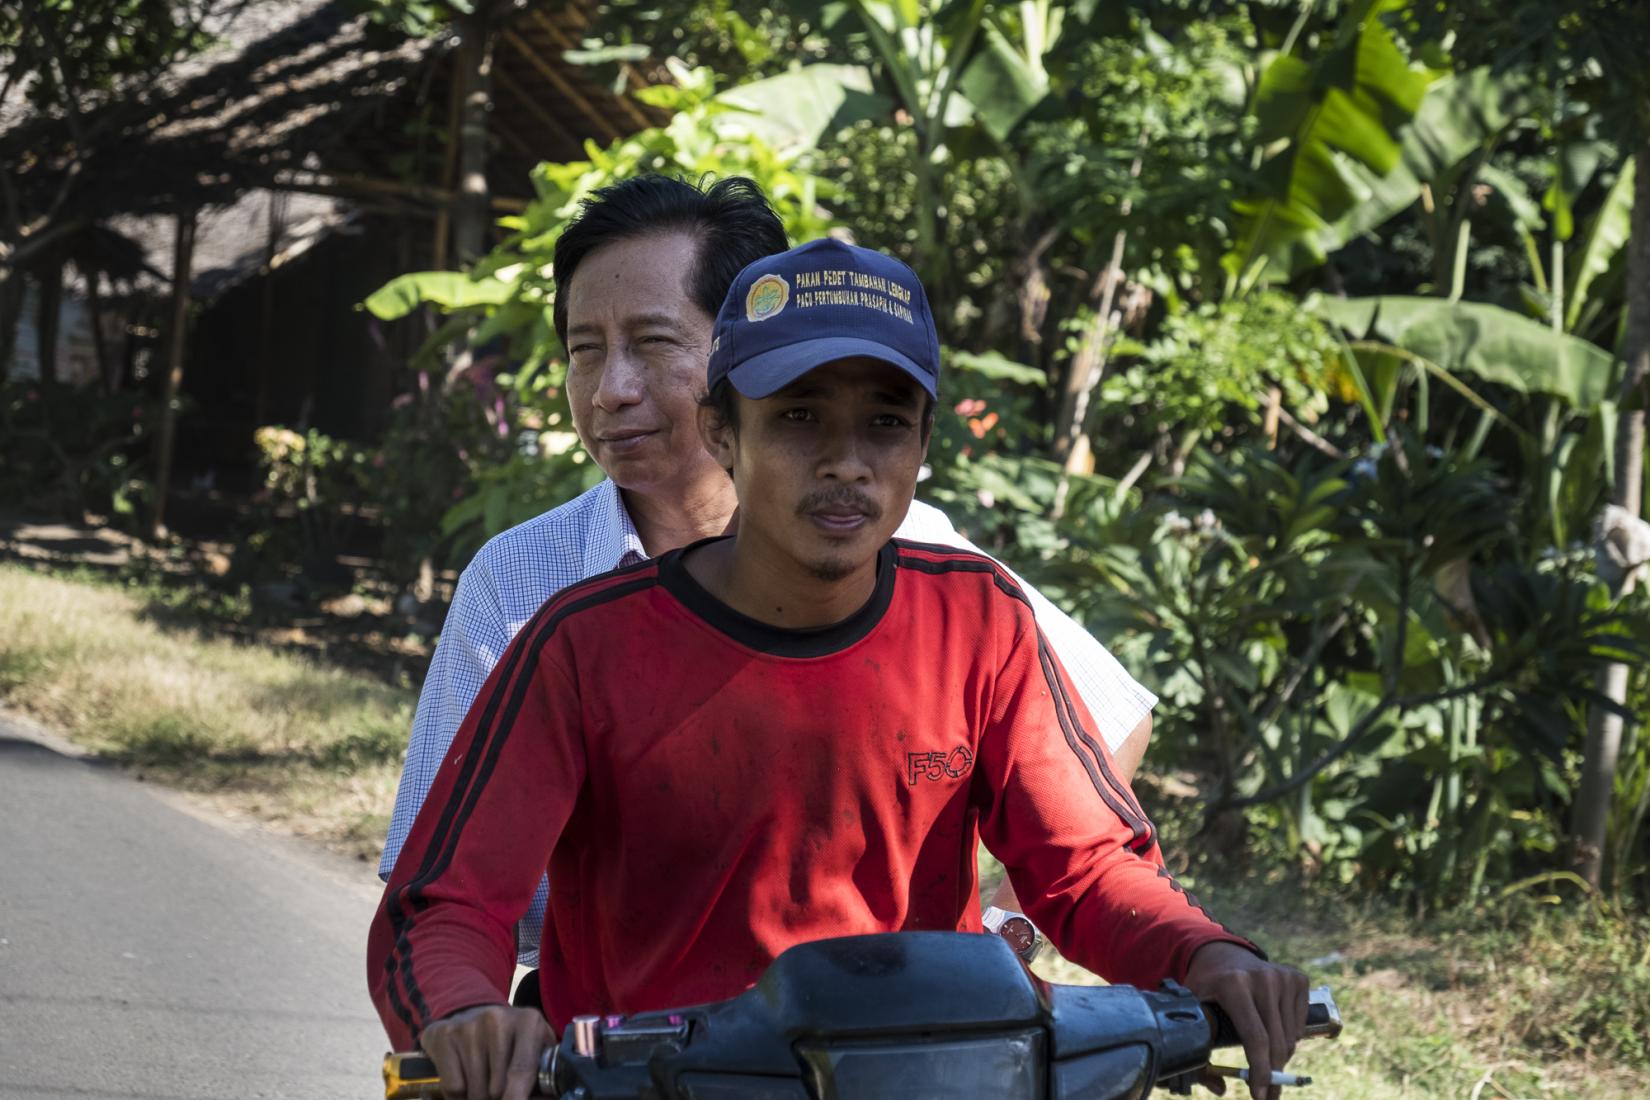 Dr Dahlanuddin one of the Indonesian project leaders rides on the back of a motorbike with a cattle farmer from Karang Kendal hamlet.